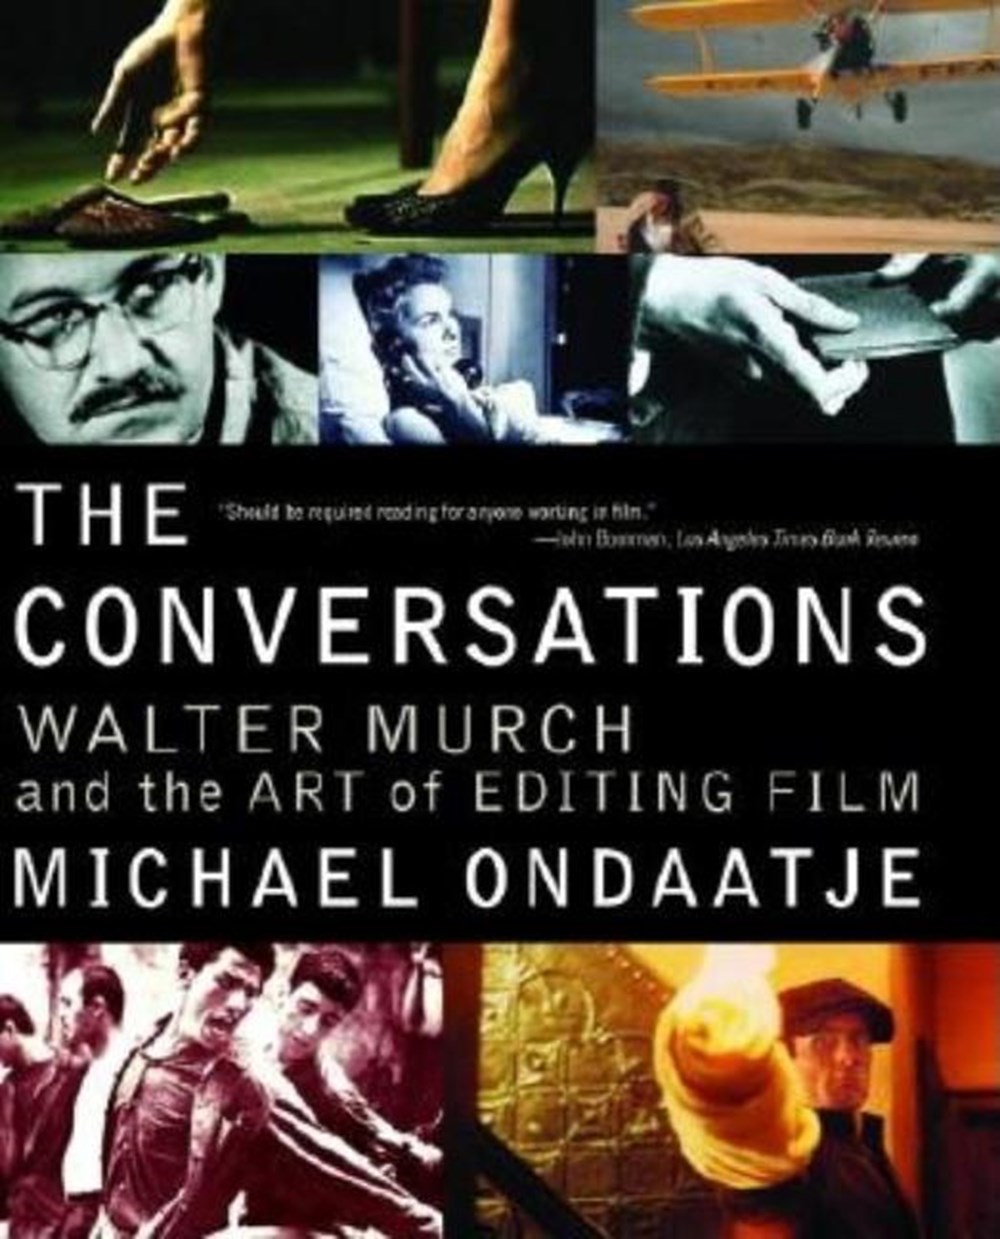 Conversations Walter Murch and the Art of Editing Film